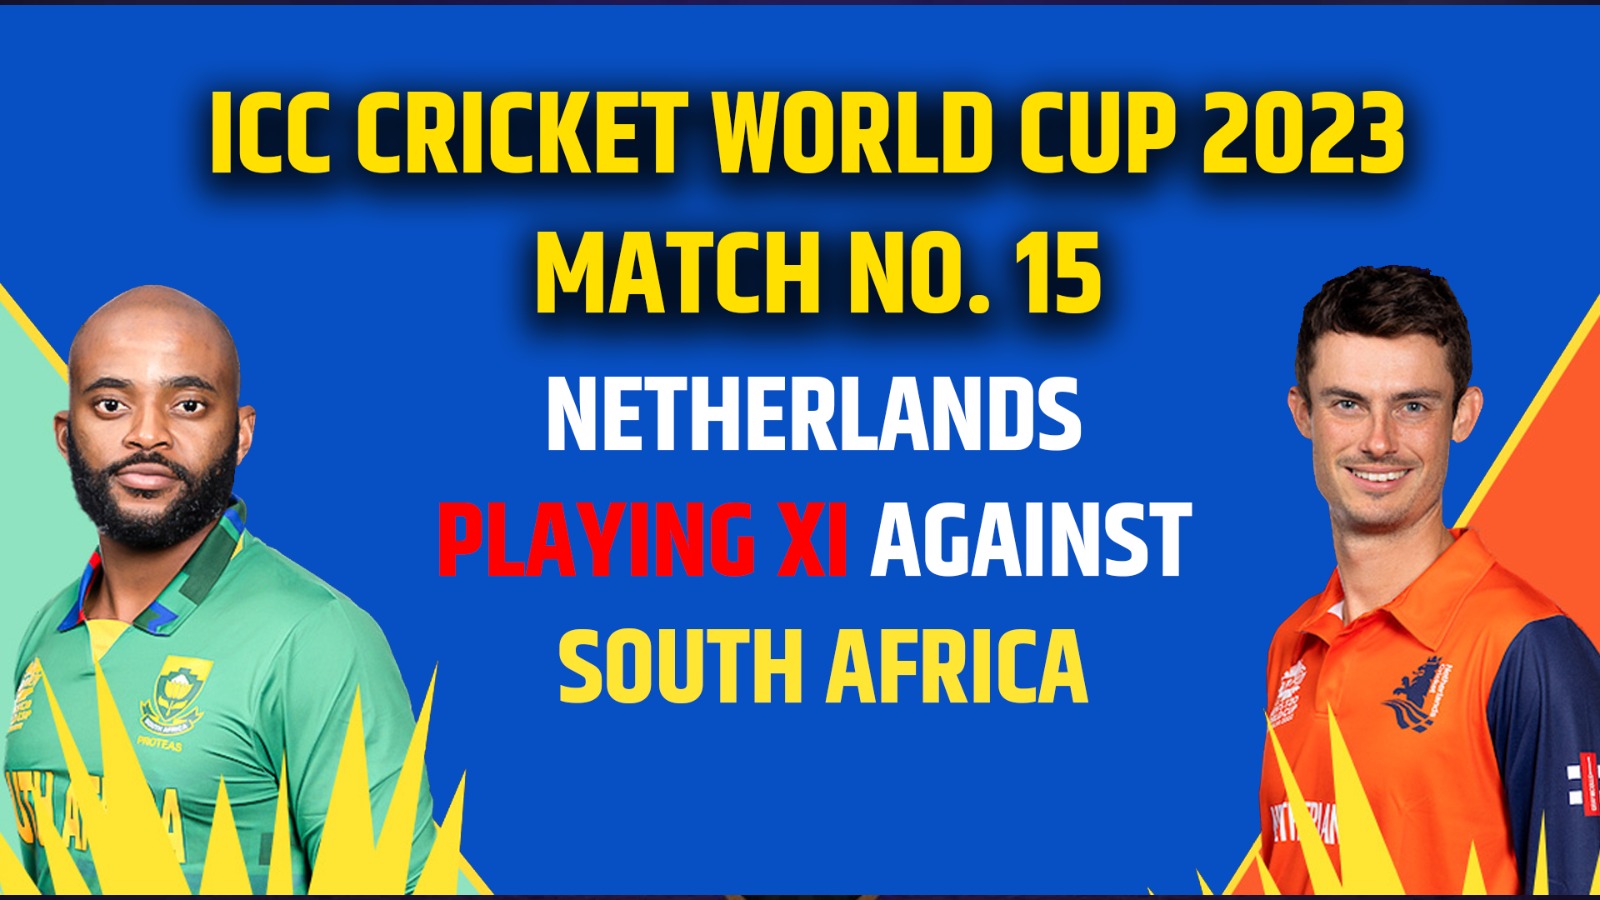 SA vs NED Netherlands Playing XI against South Africa, Match No. 15, ICC Cricket World Cup 2023